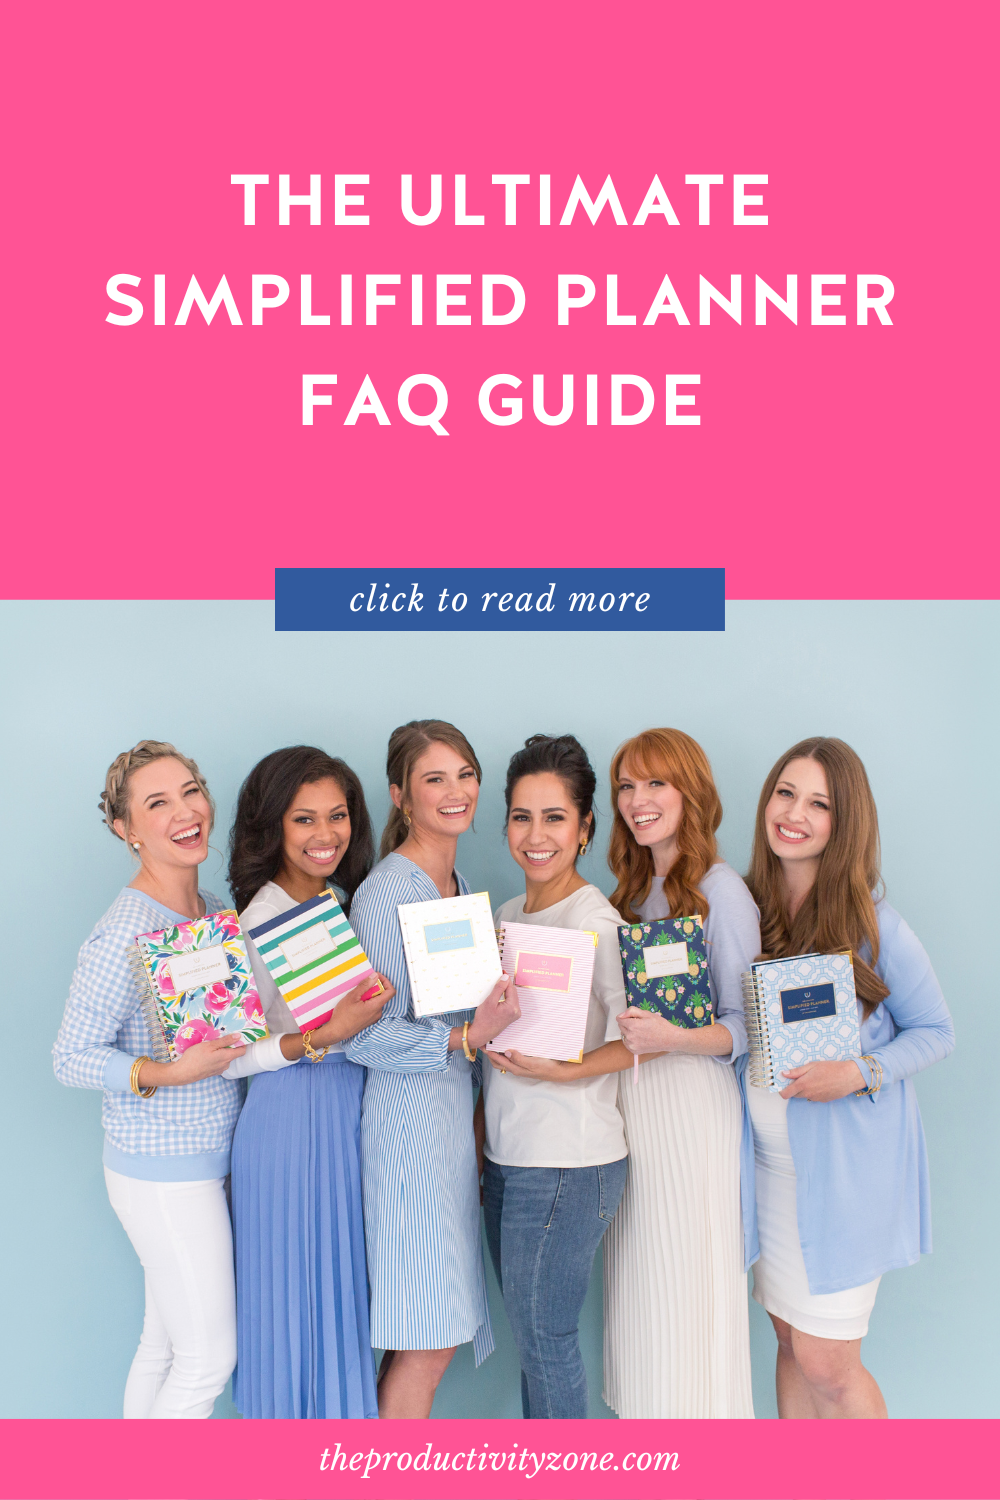 Simplified Planner girls holding 2021 Simplified Planners in Happy Floral, Happy Stripe, Gold Bee, Pink Pinstripe, Pineapple Crest, and Blue Trellis